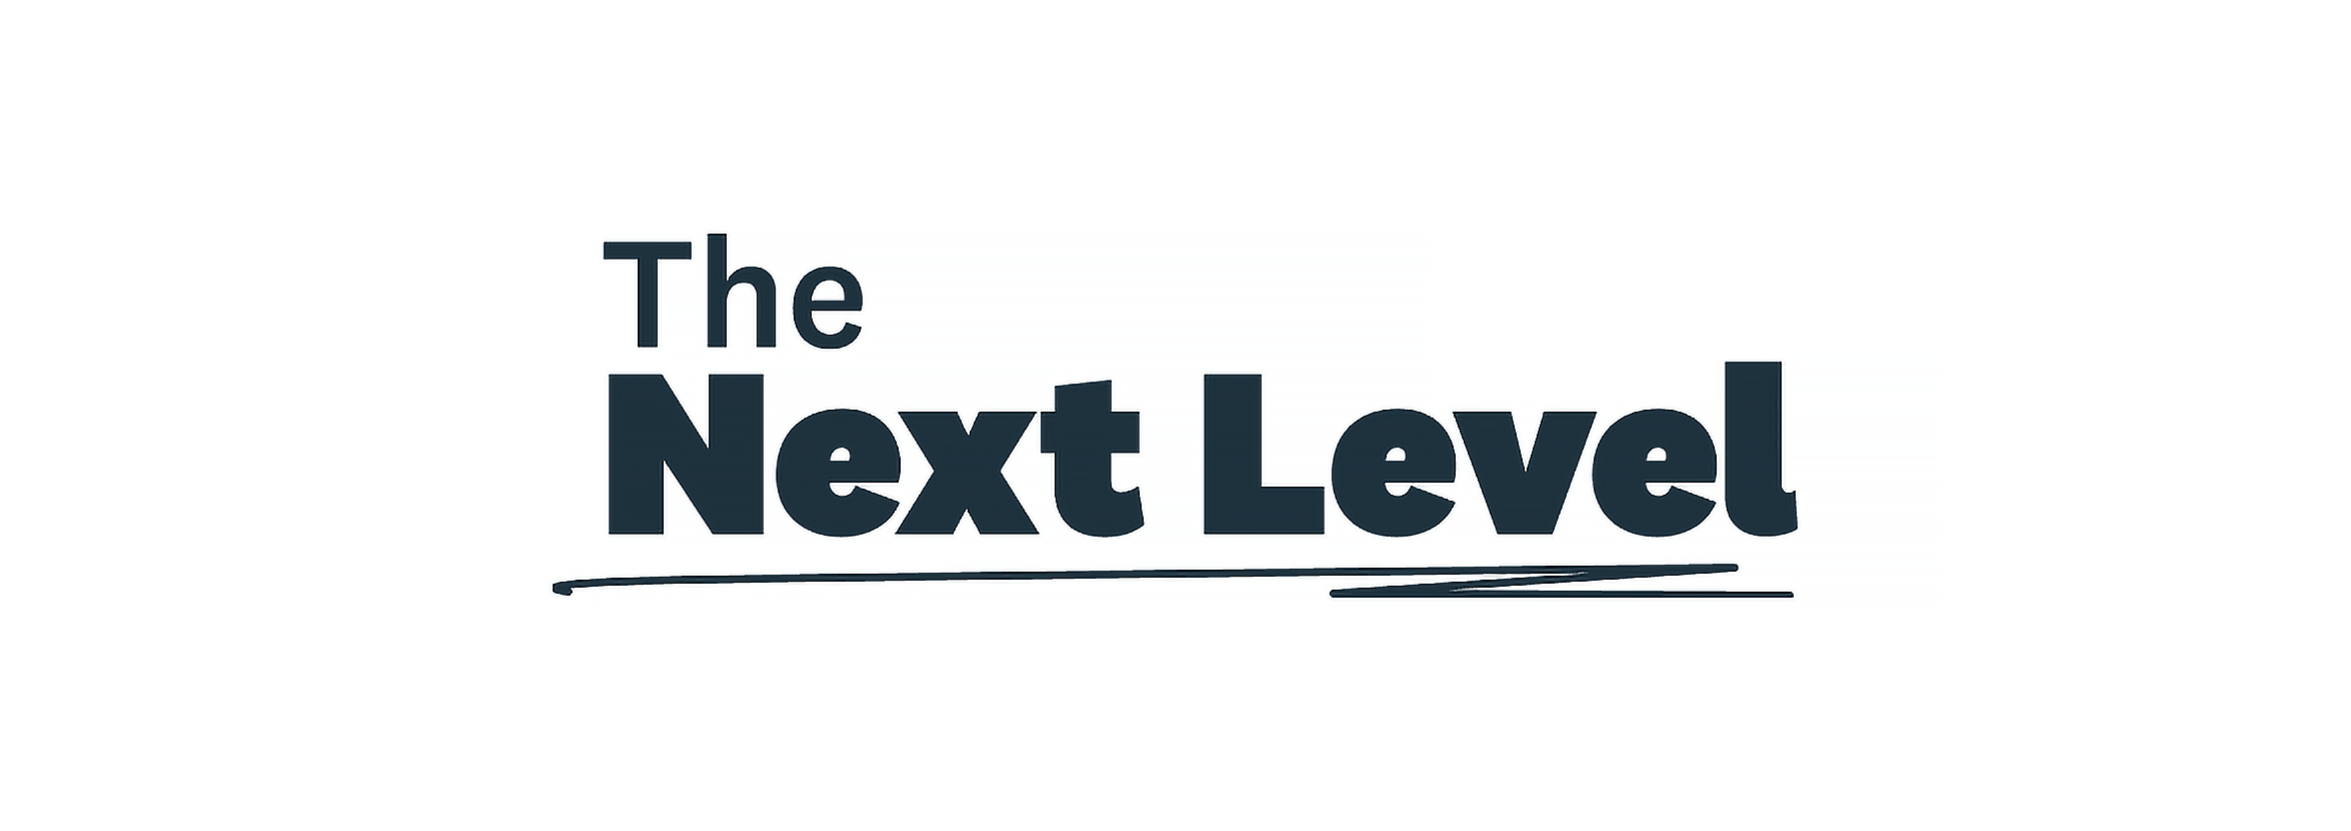 Logo for The Next Level, Xero’s guide to promoting wellbeing.